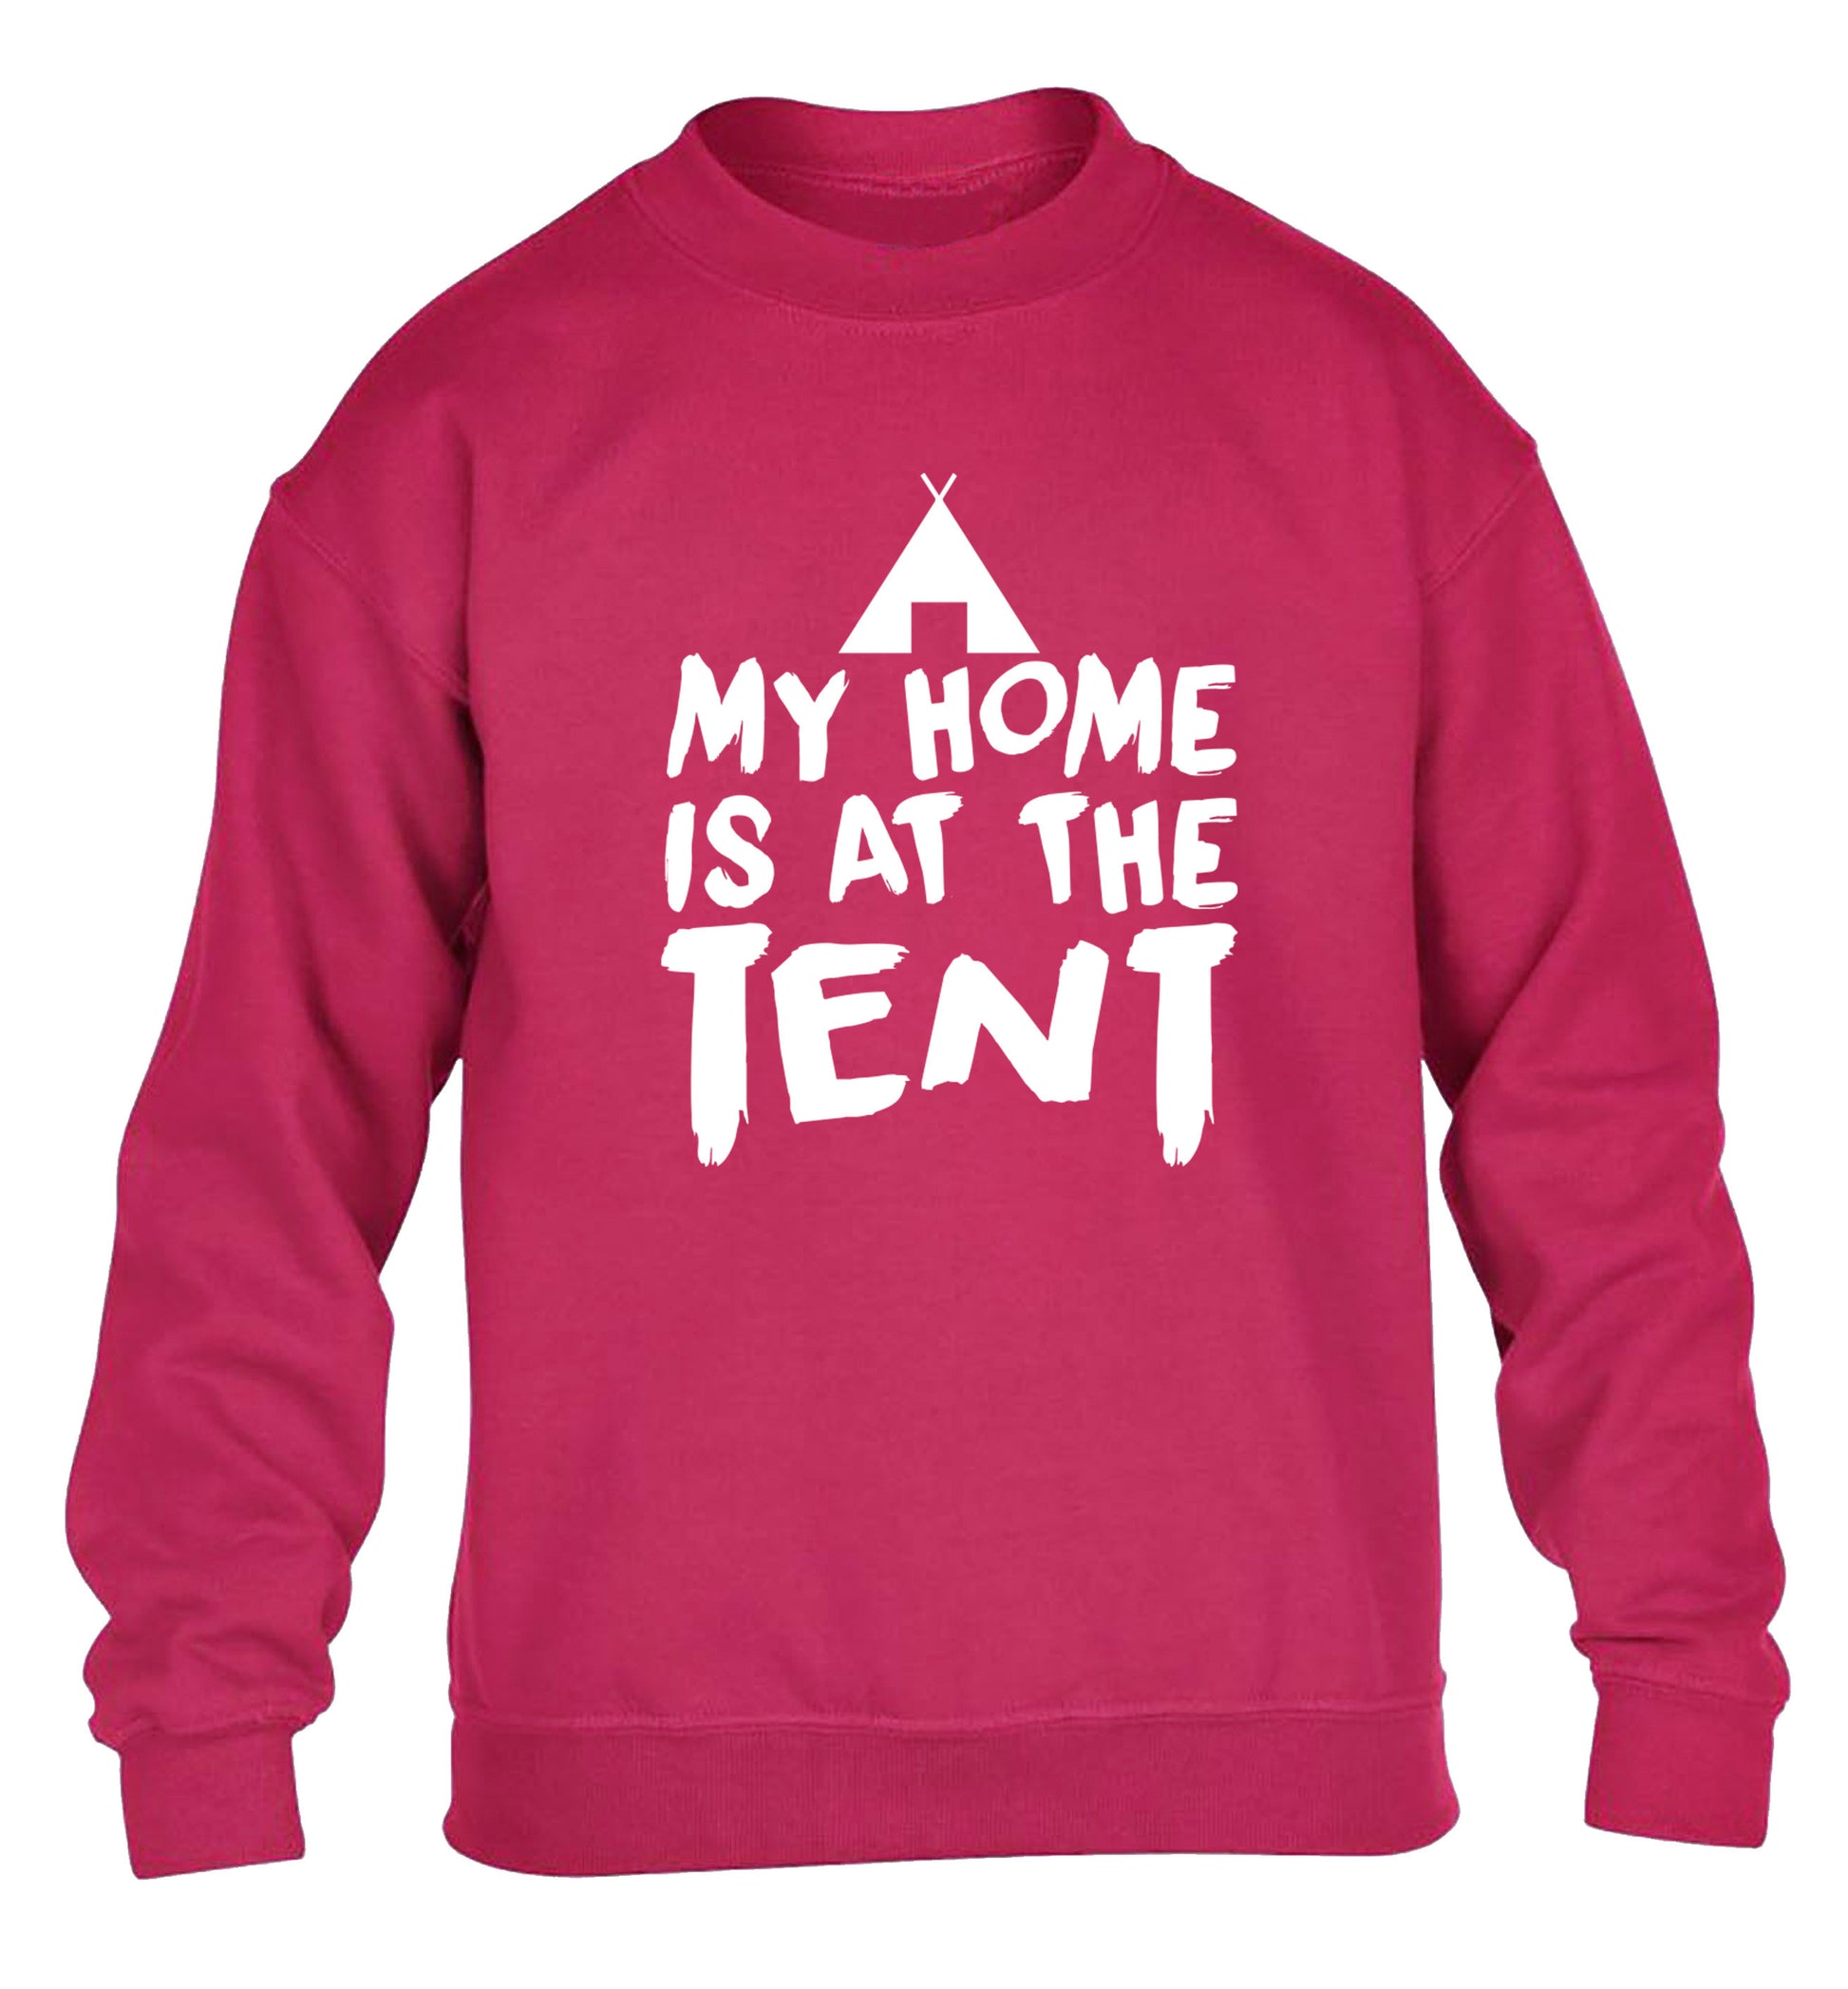 My home is at the tent children's pink sweater 12-14 Years